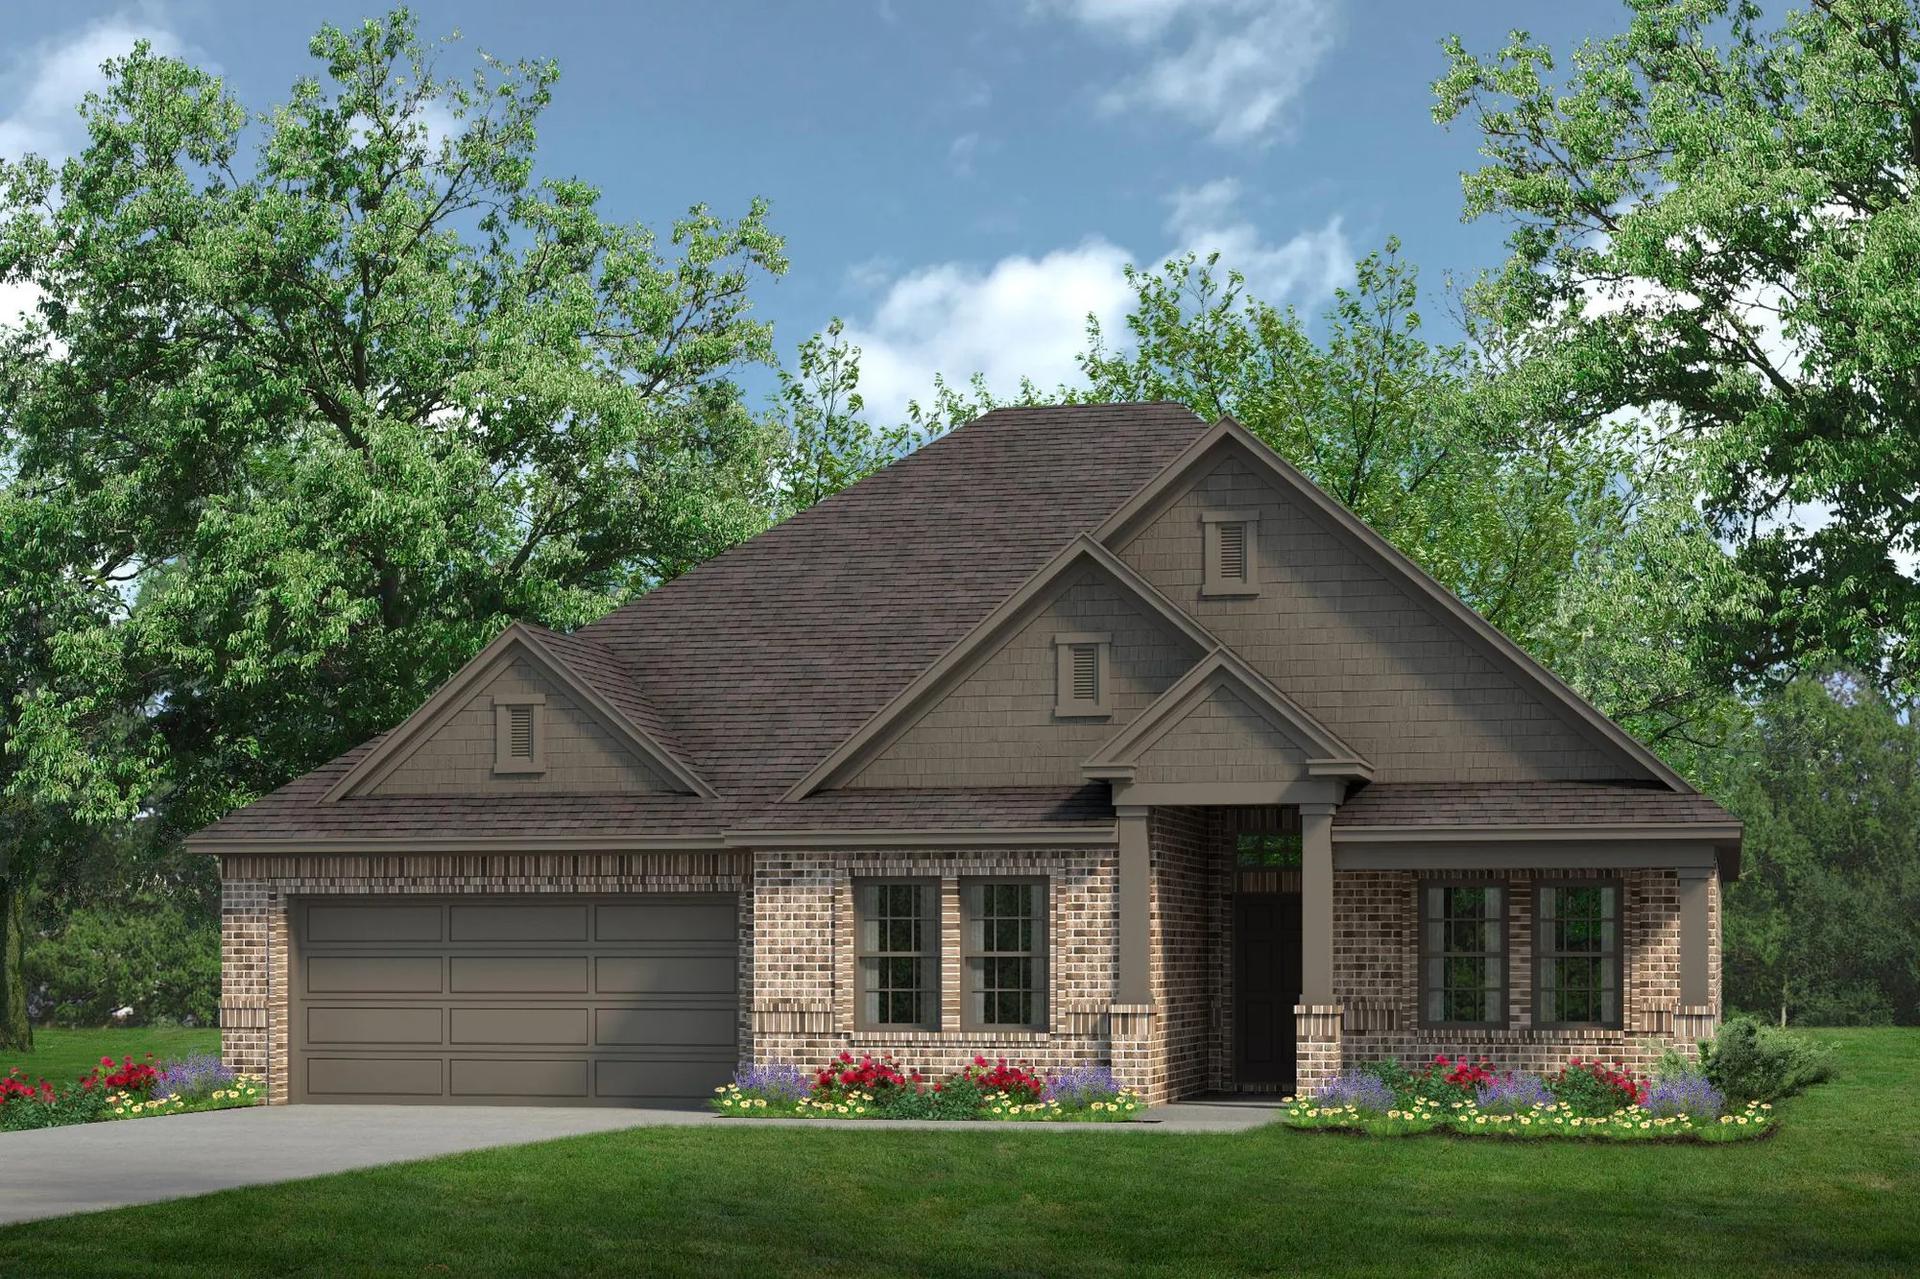 2434 D. 3br New Home in Waxahachie, TX